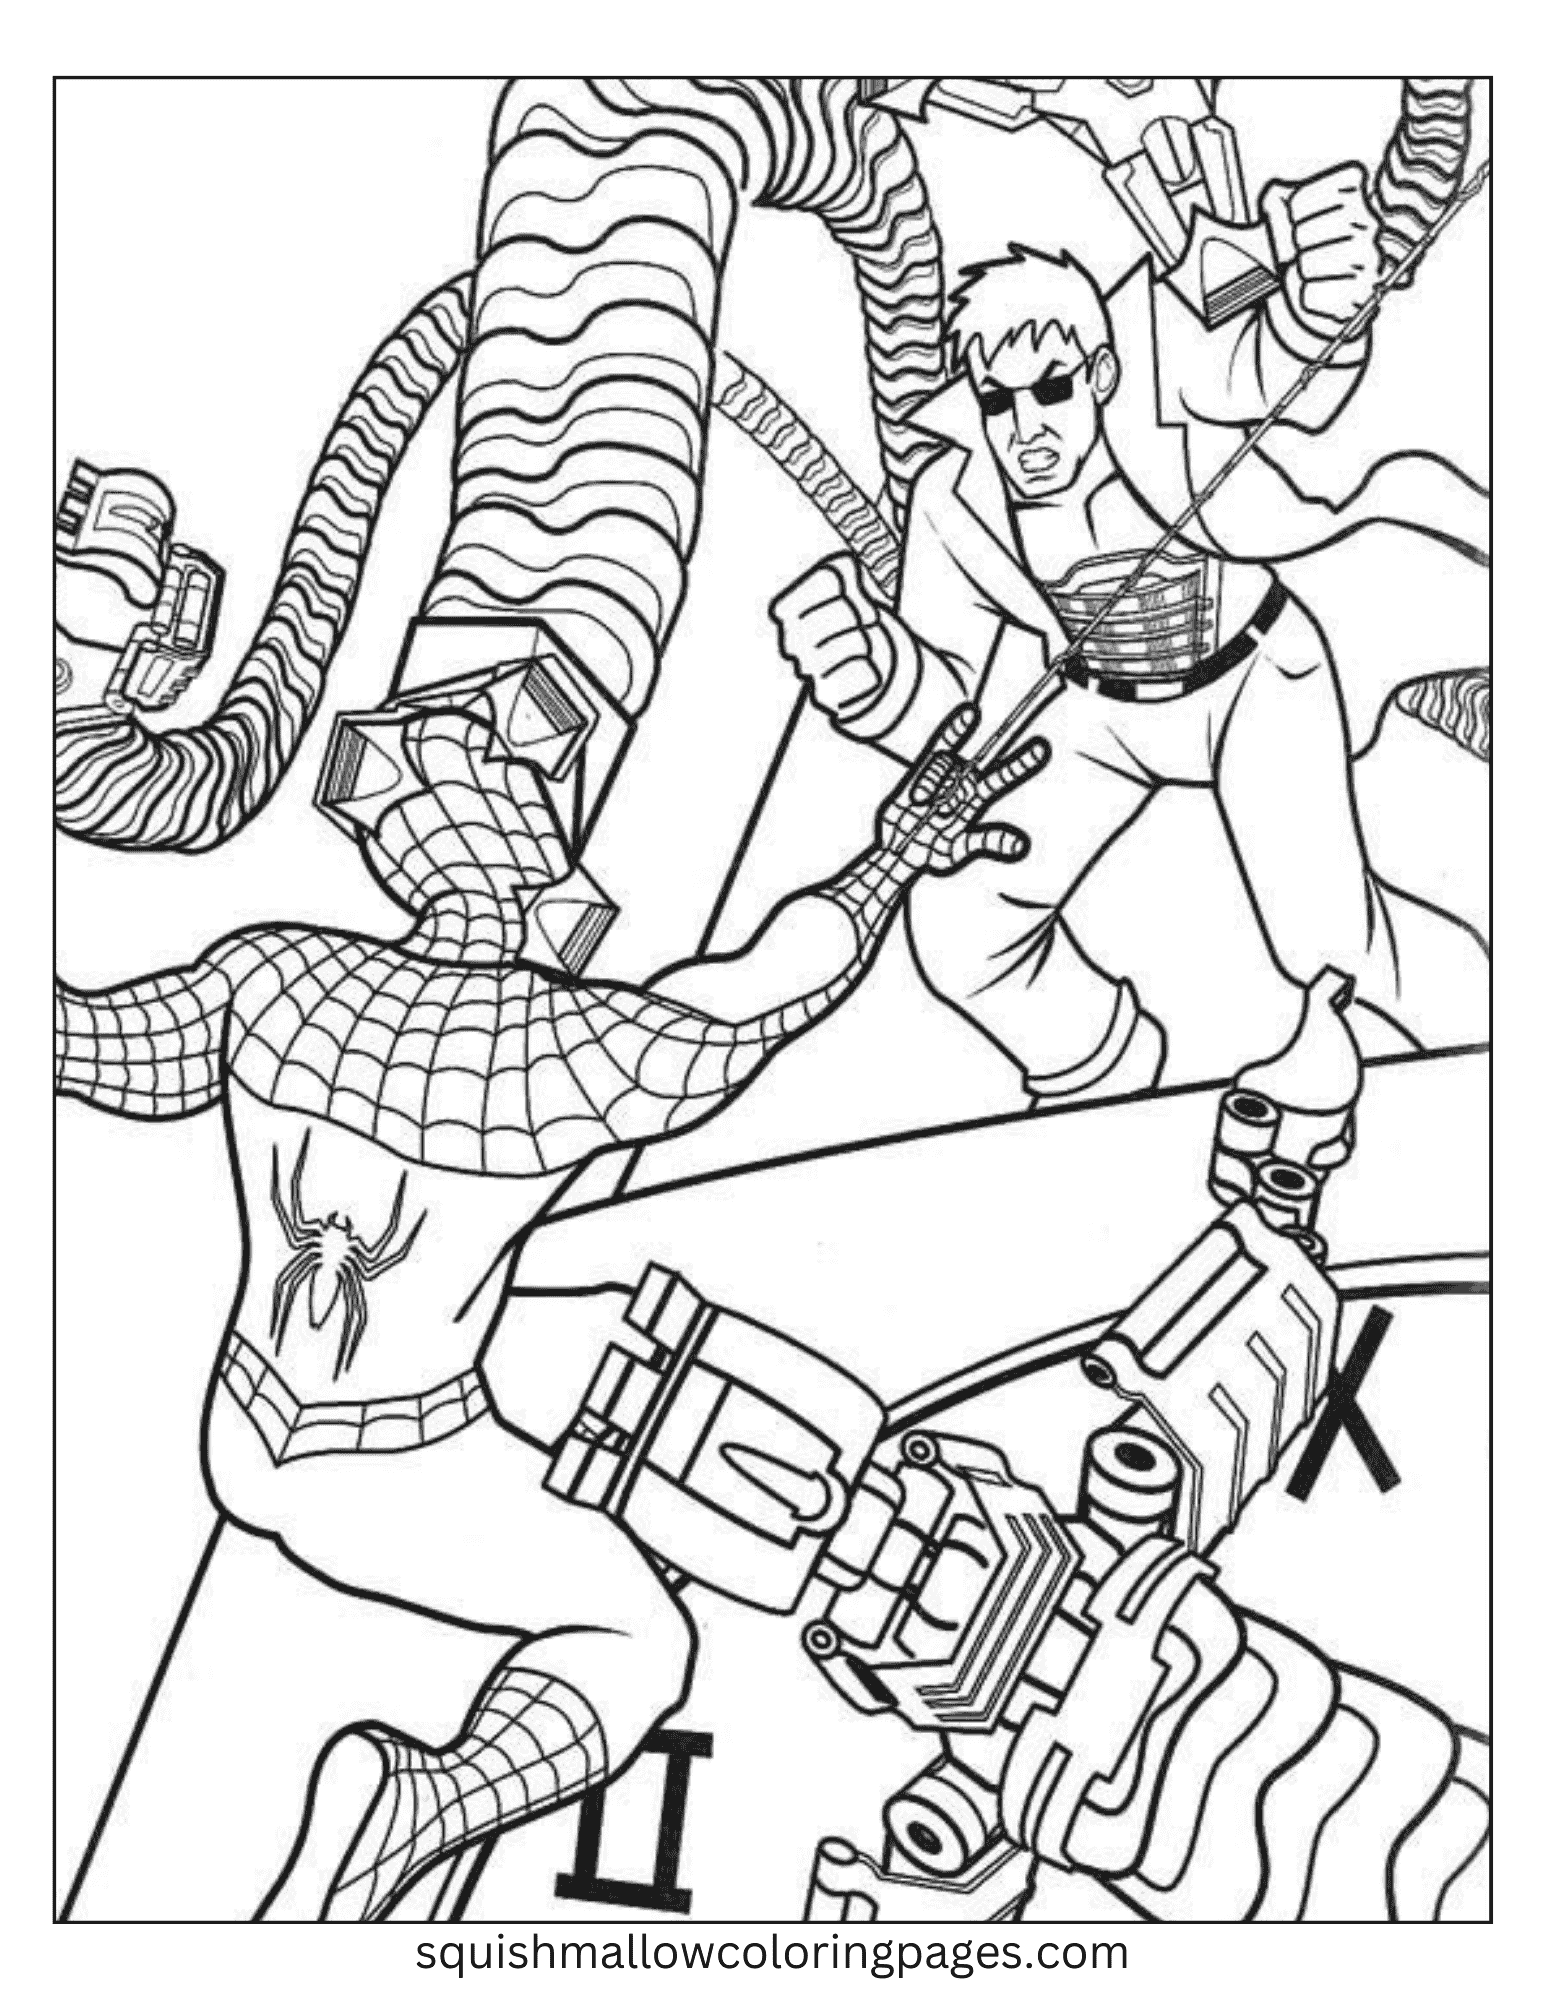 Fighting Spiderman Coloring Pages